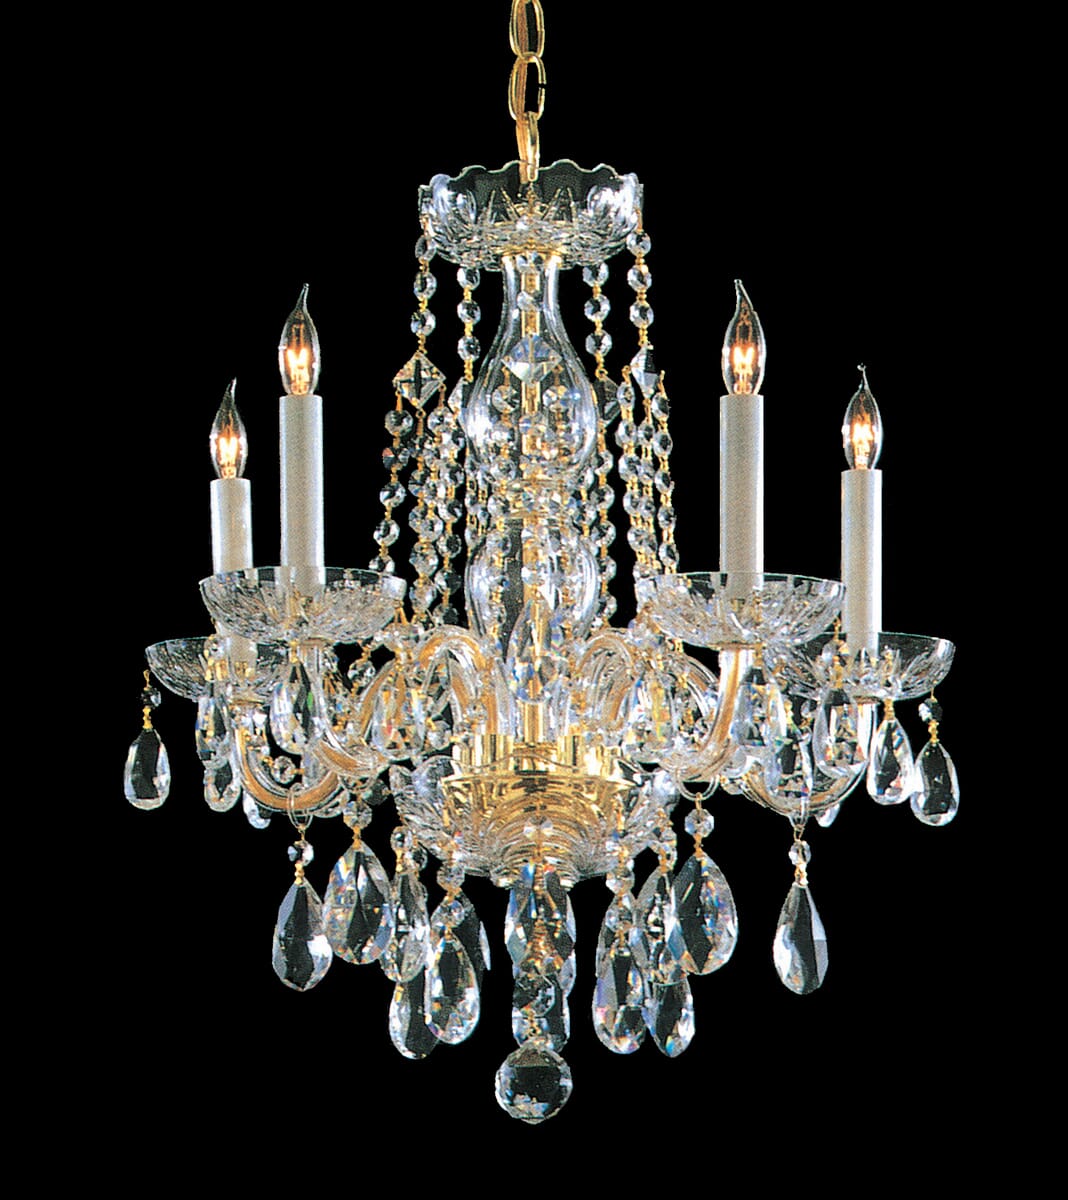 Traditional Crystal 5-Light 20"" Mini Chandelier in Polished Brass with Clear Spectra Crystals -  Crystorama, 1061-PB-CL-SAQ